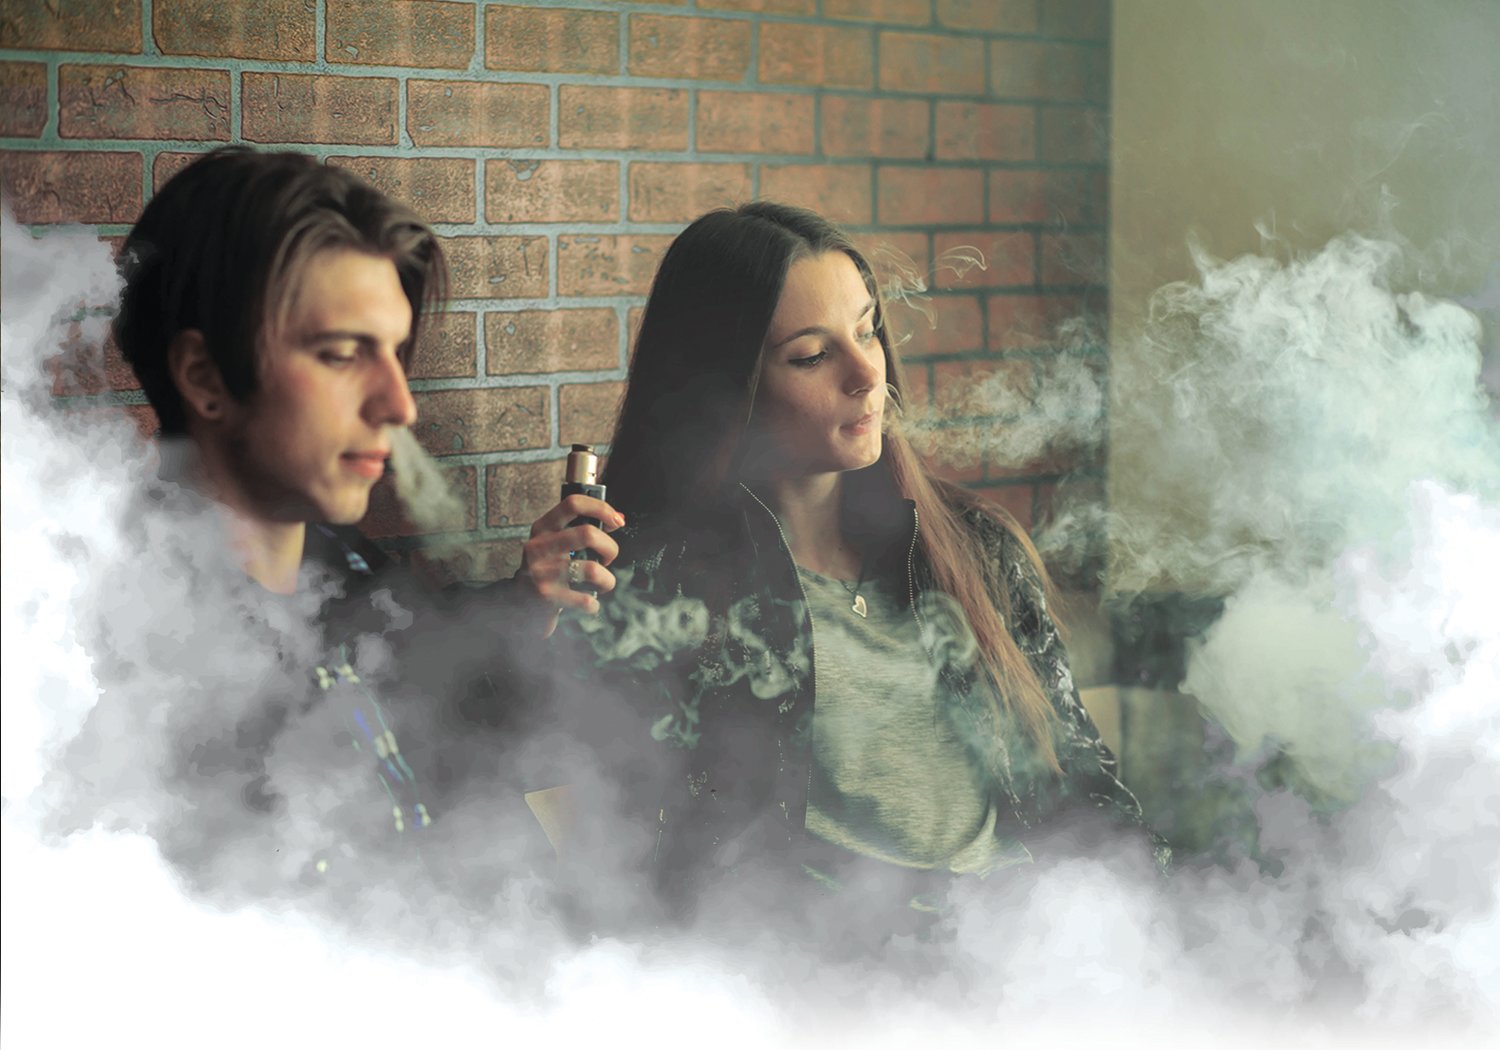 The CDC found that in 2022, 2.55 million high school and middle school students reported they currently use an e-cigarette. About 85% reported that they use flavored e-cigarettes, and over 50% reported using a disposable e-cigarette. 